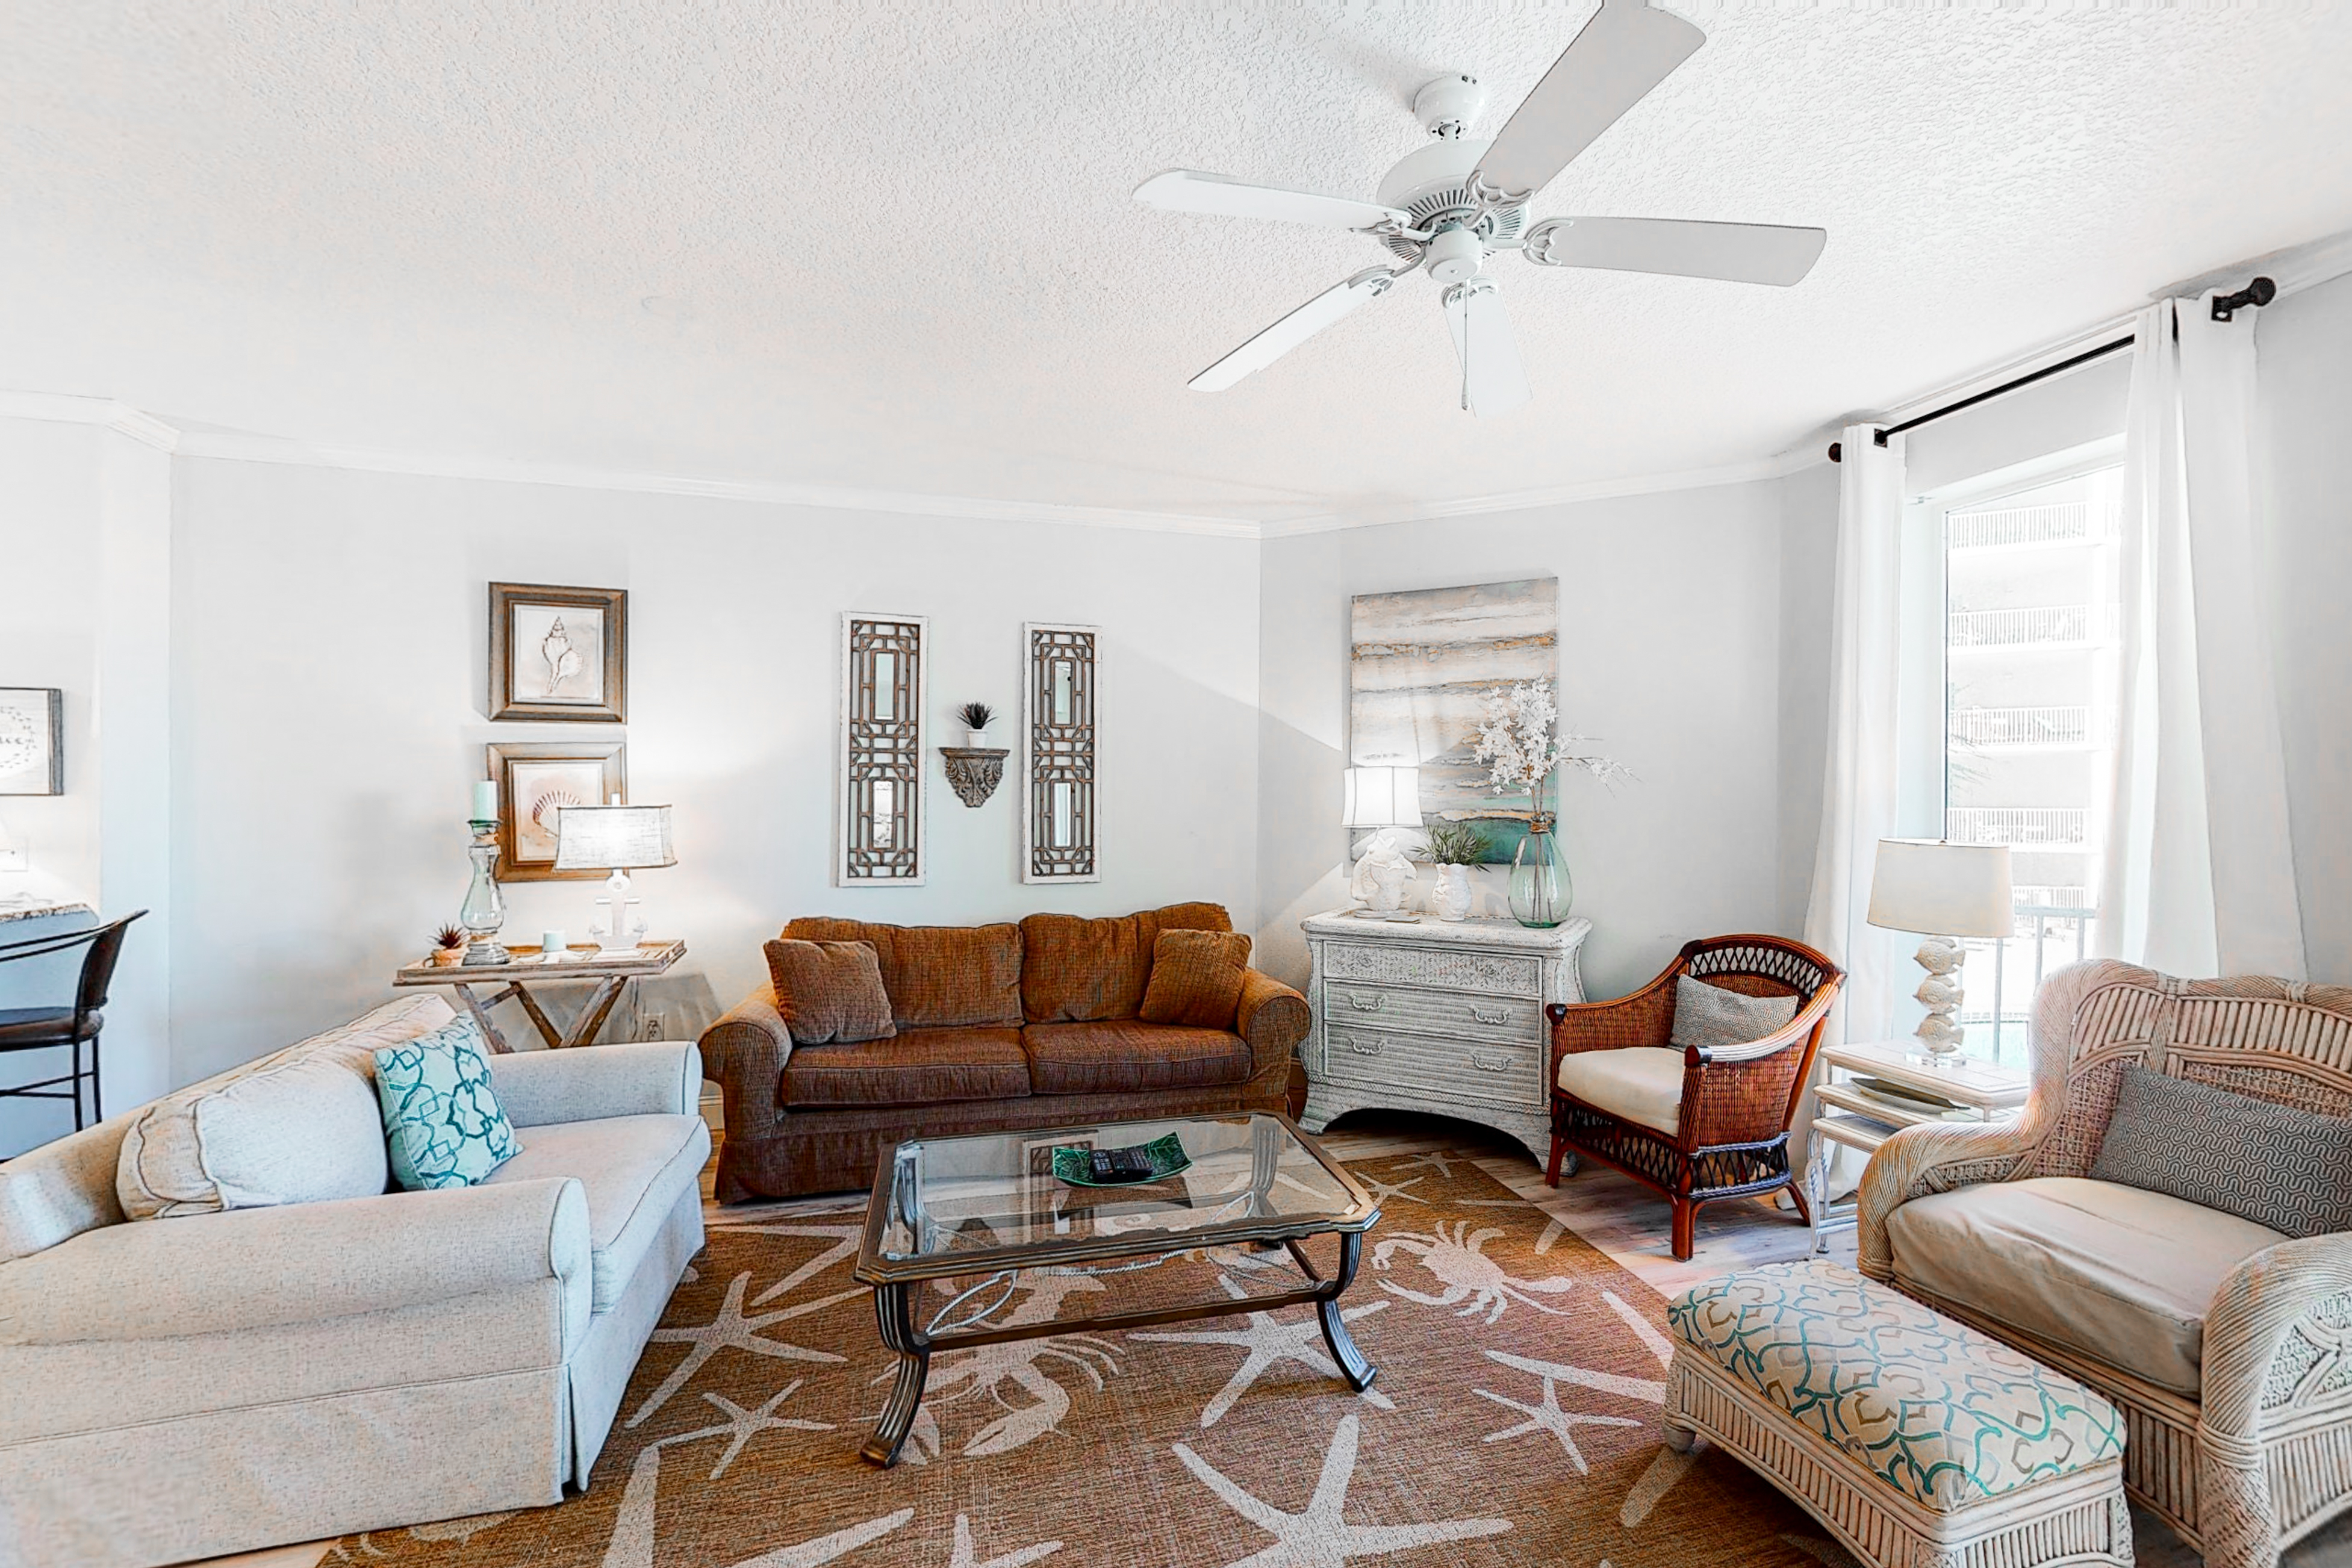 Dunes of Seagrove B101 Condo rental in Dunes of Seagrove in Highway 30-A Florida - #2